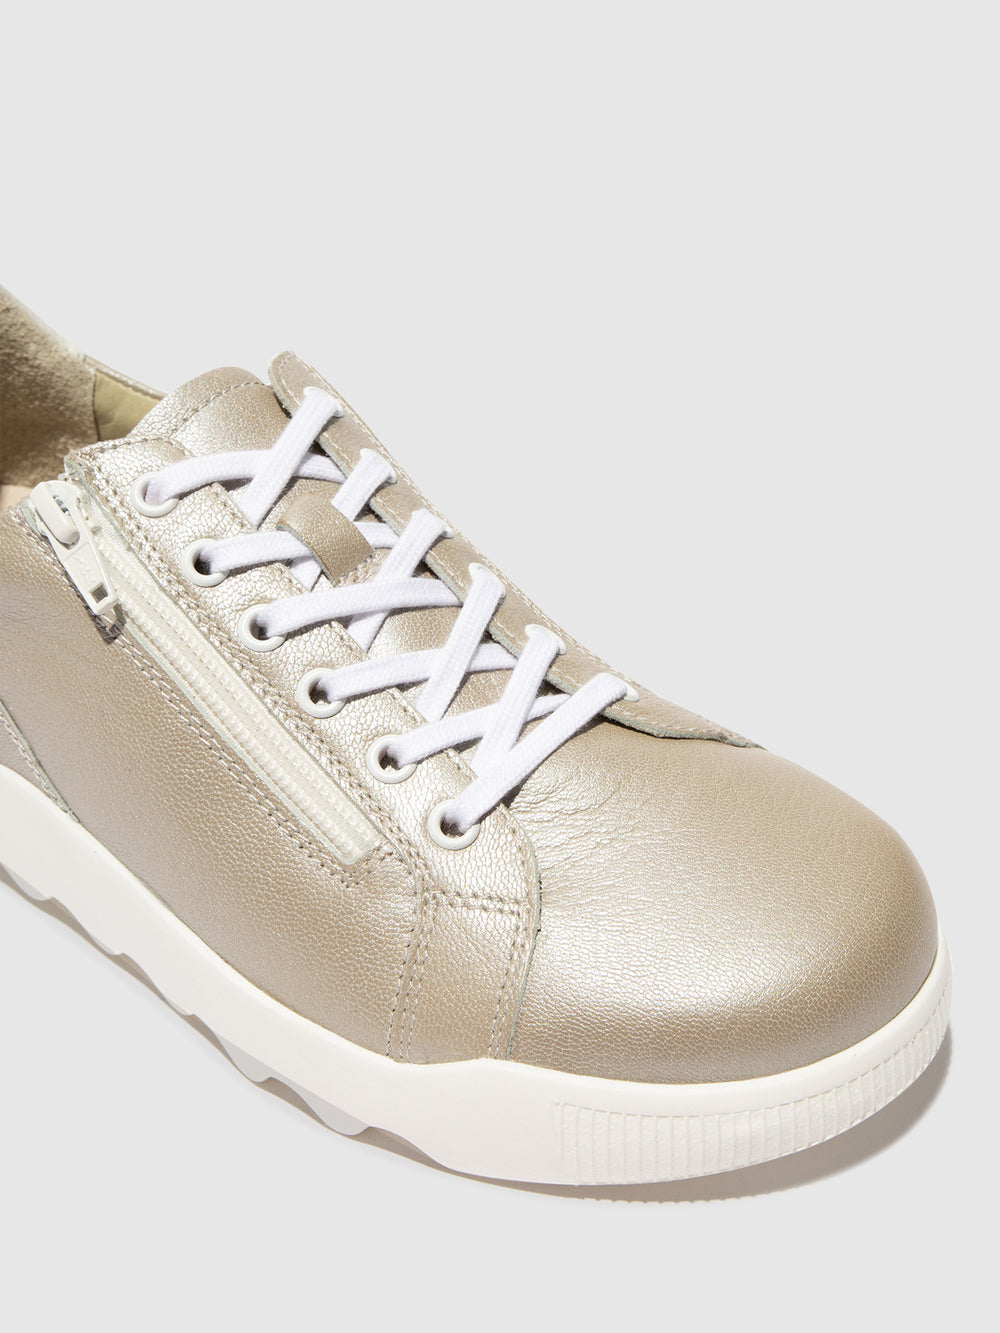 Lace-up Trainers WHIZ719SOF SILVER/WHITE